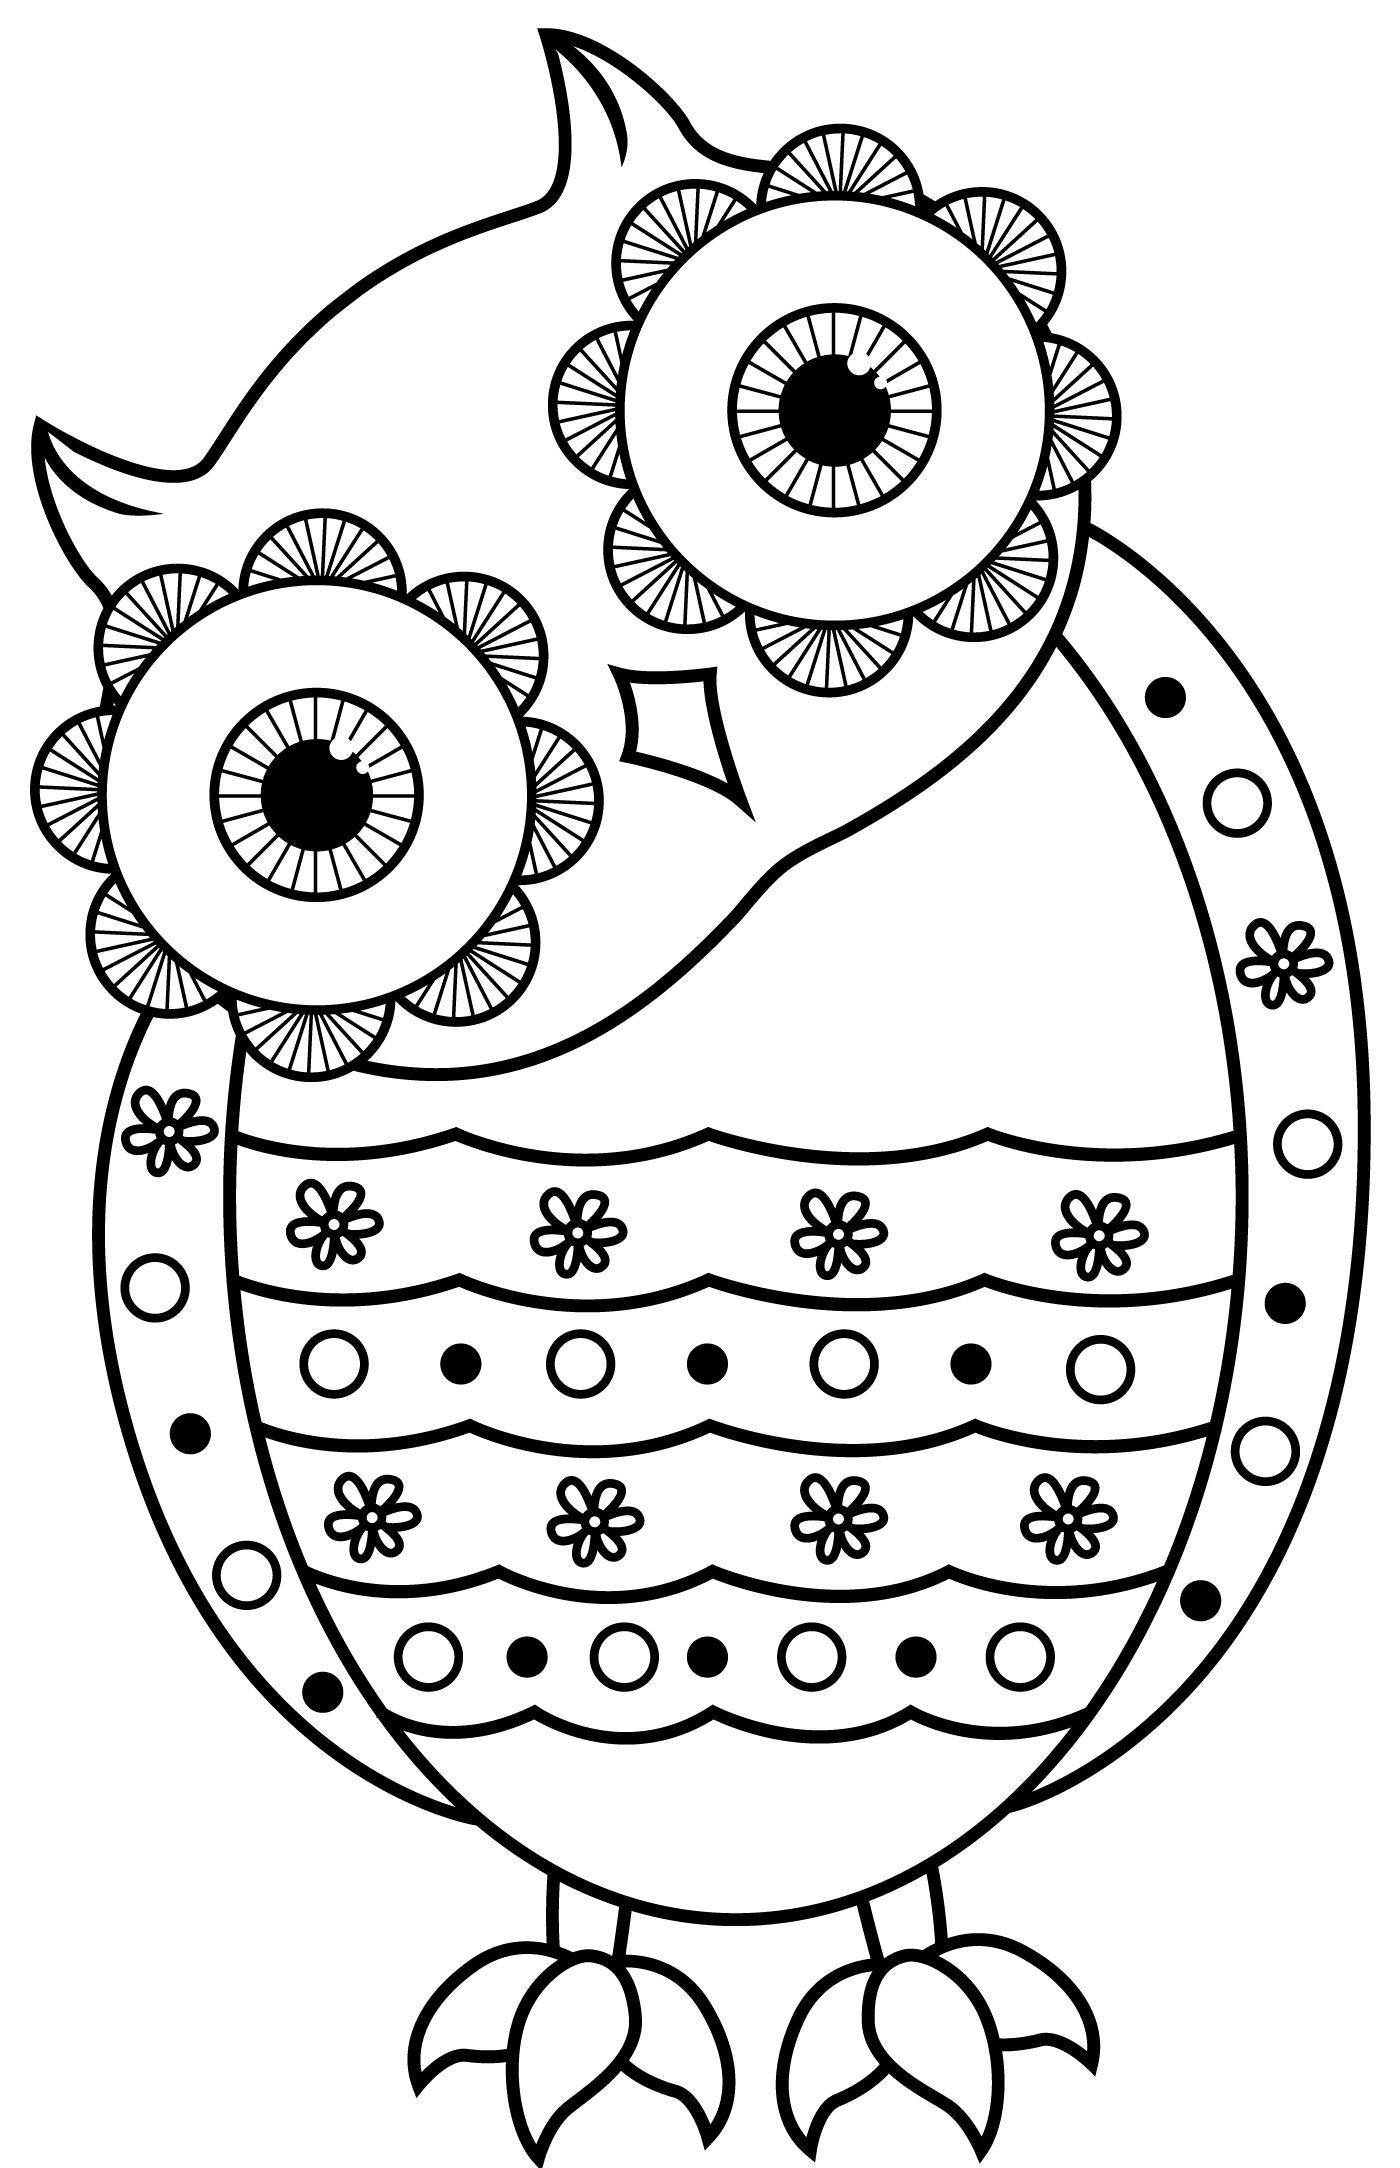 Large print owls pdf coloring book for beginners seniors or visually â rachel mintz coloring books